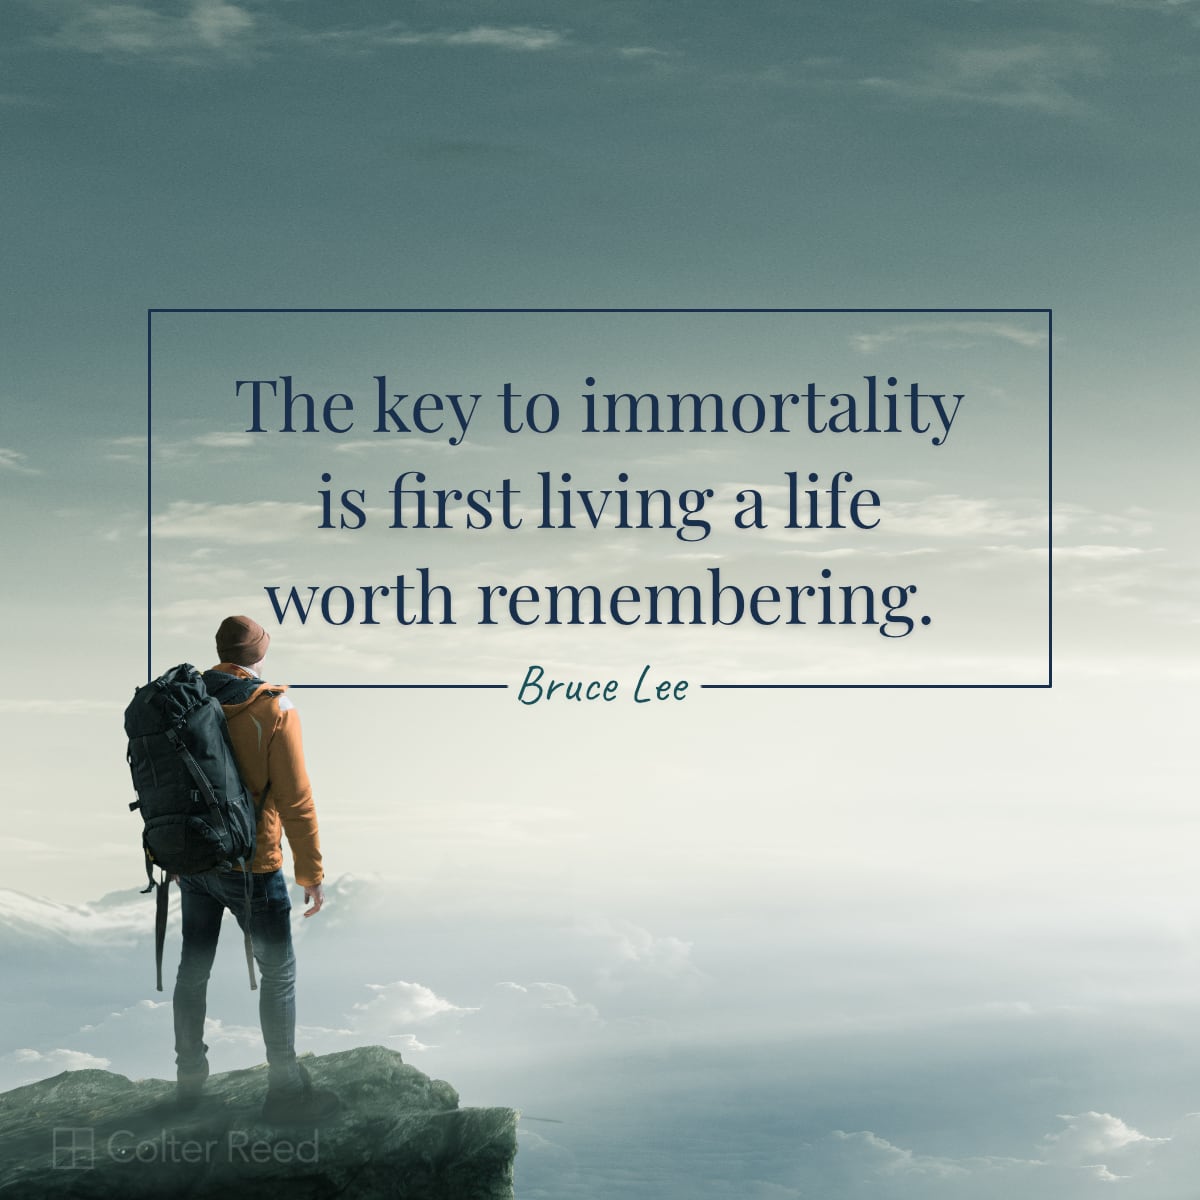 The key to immortality is first living a life worth remembering. —Bruce Lee